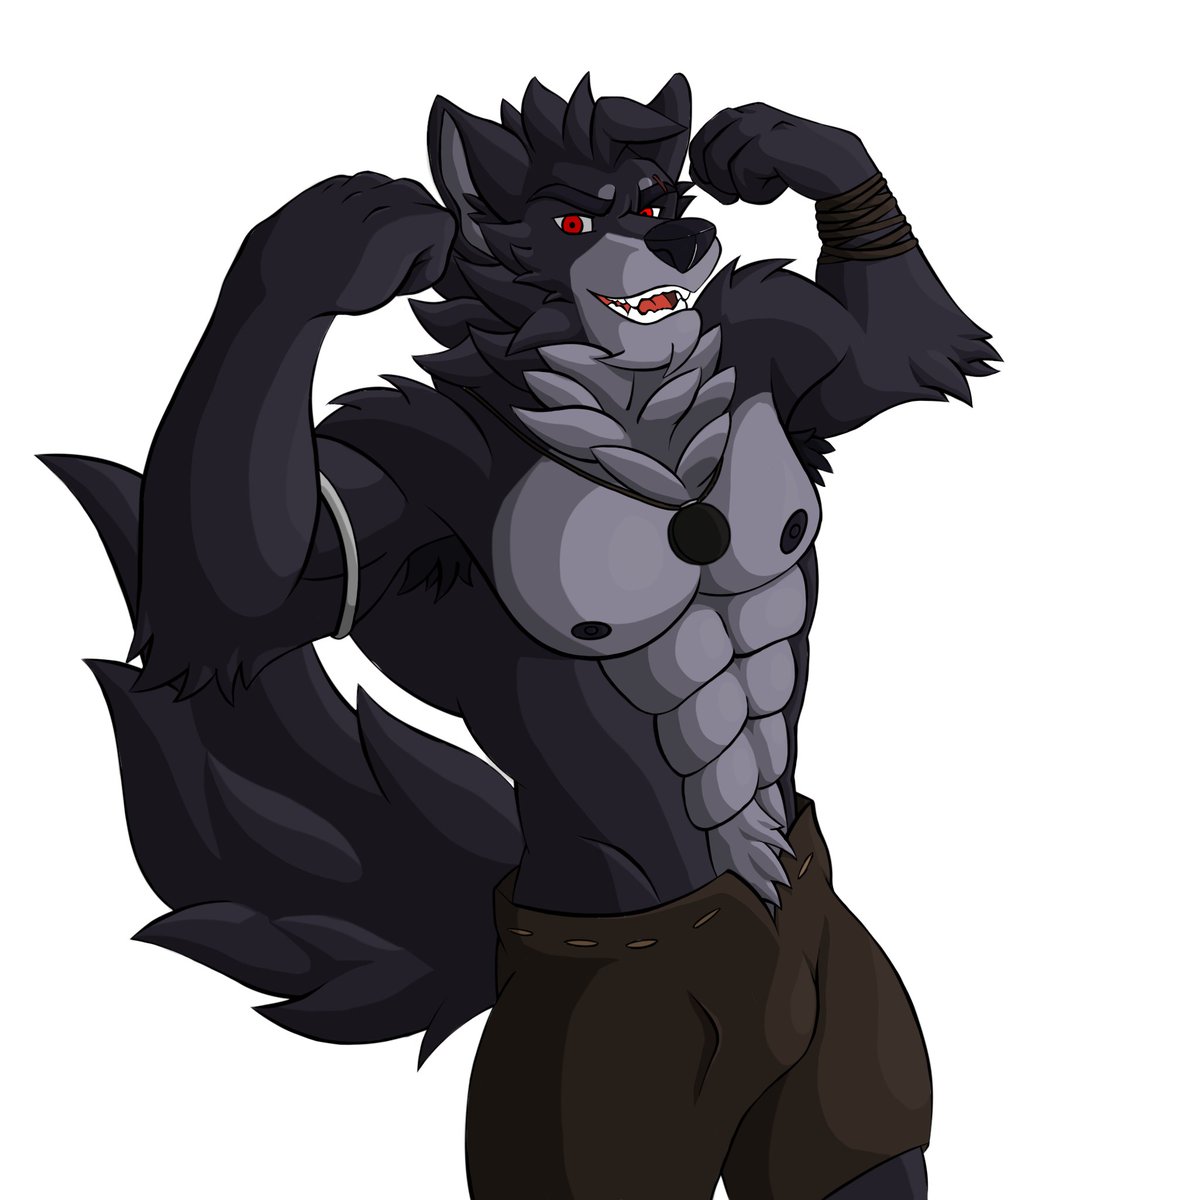 Quickk Looks Like Vulgor Wanted To Show Off His Muscles Too I Tried Out Some More Dynamic Lighting For This One Character Designed By Kael Tiger From Far Beyond The World